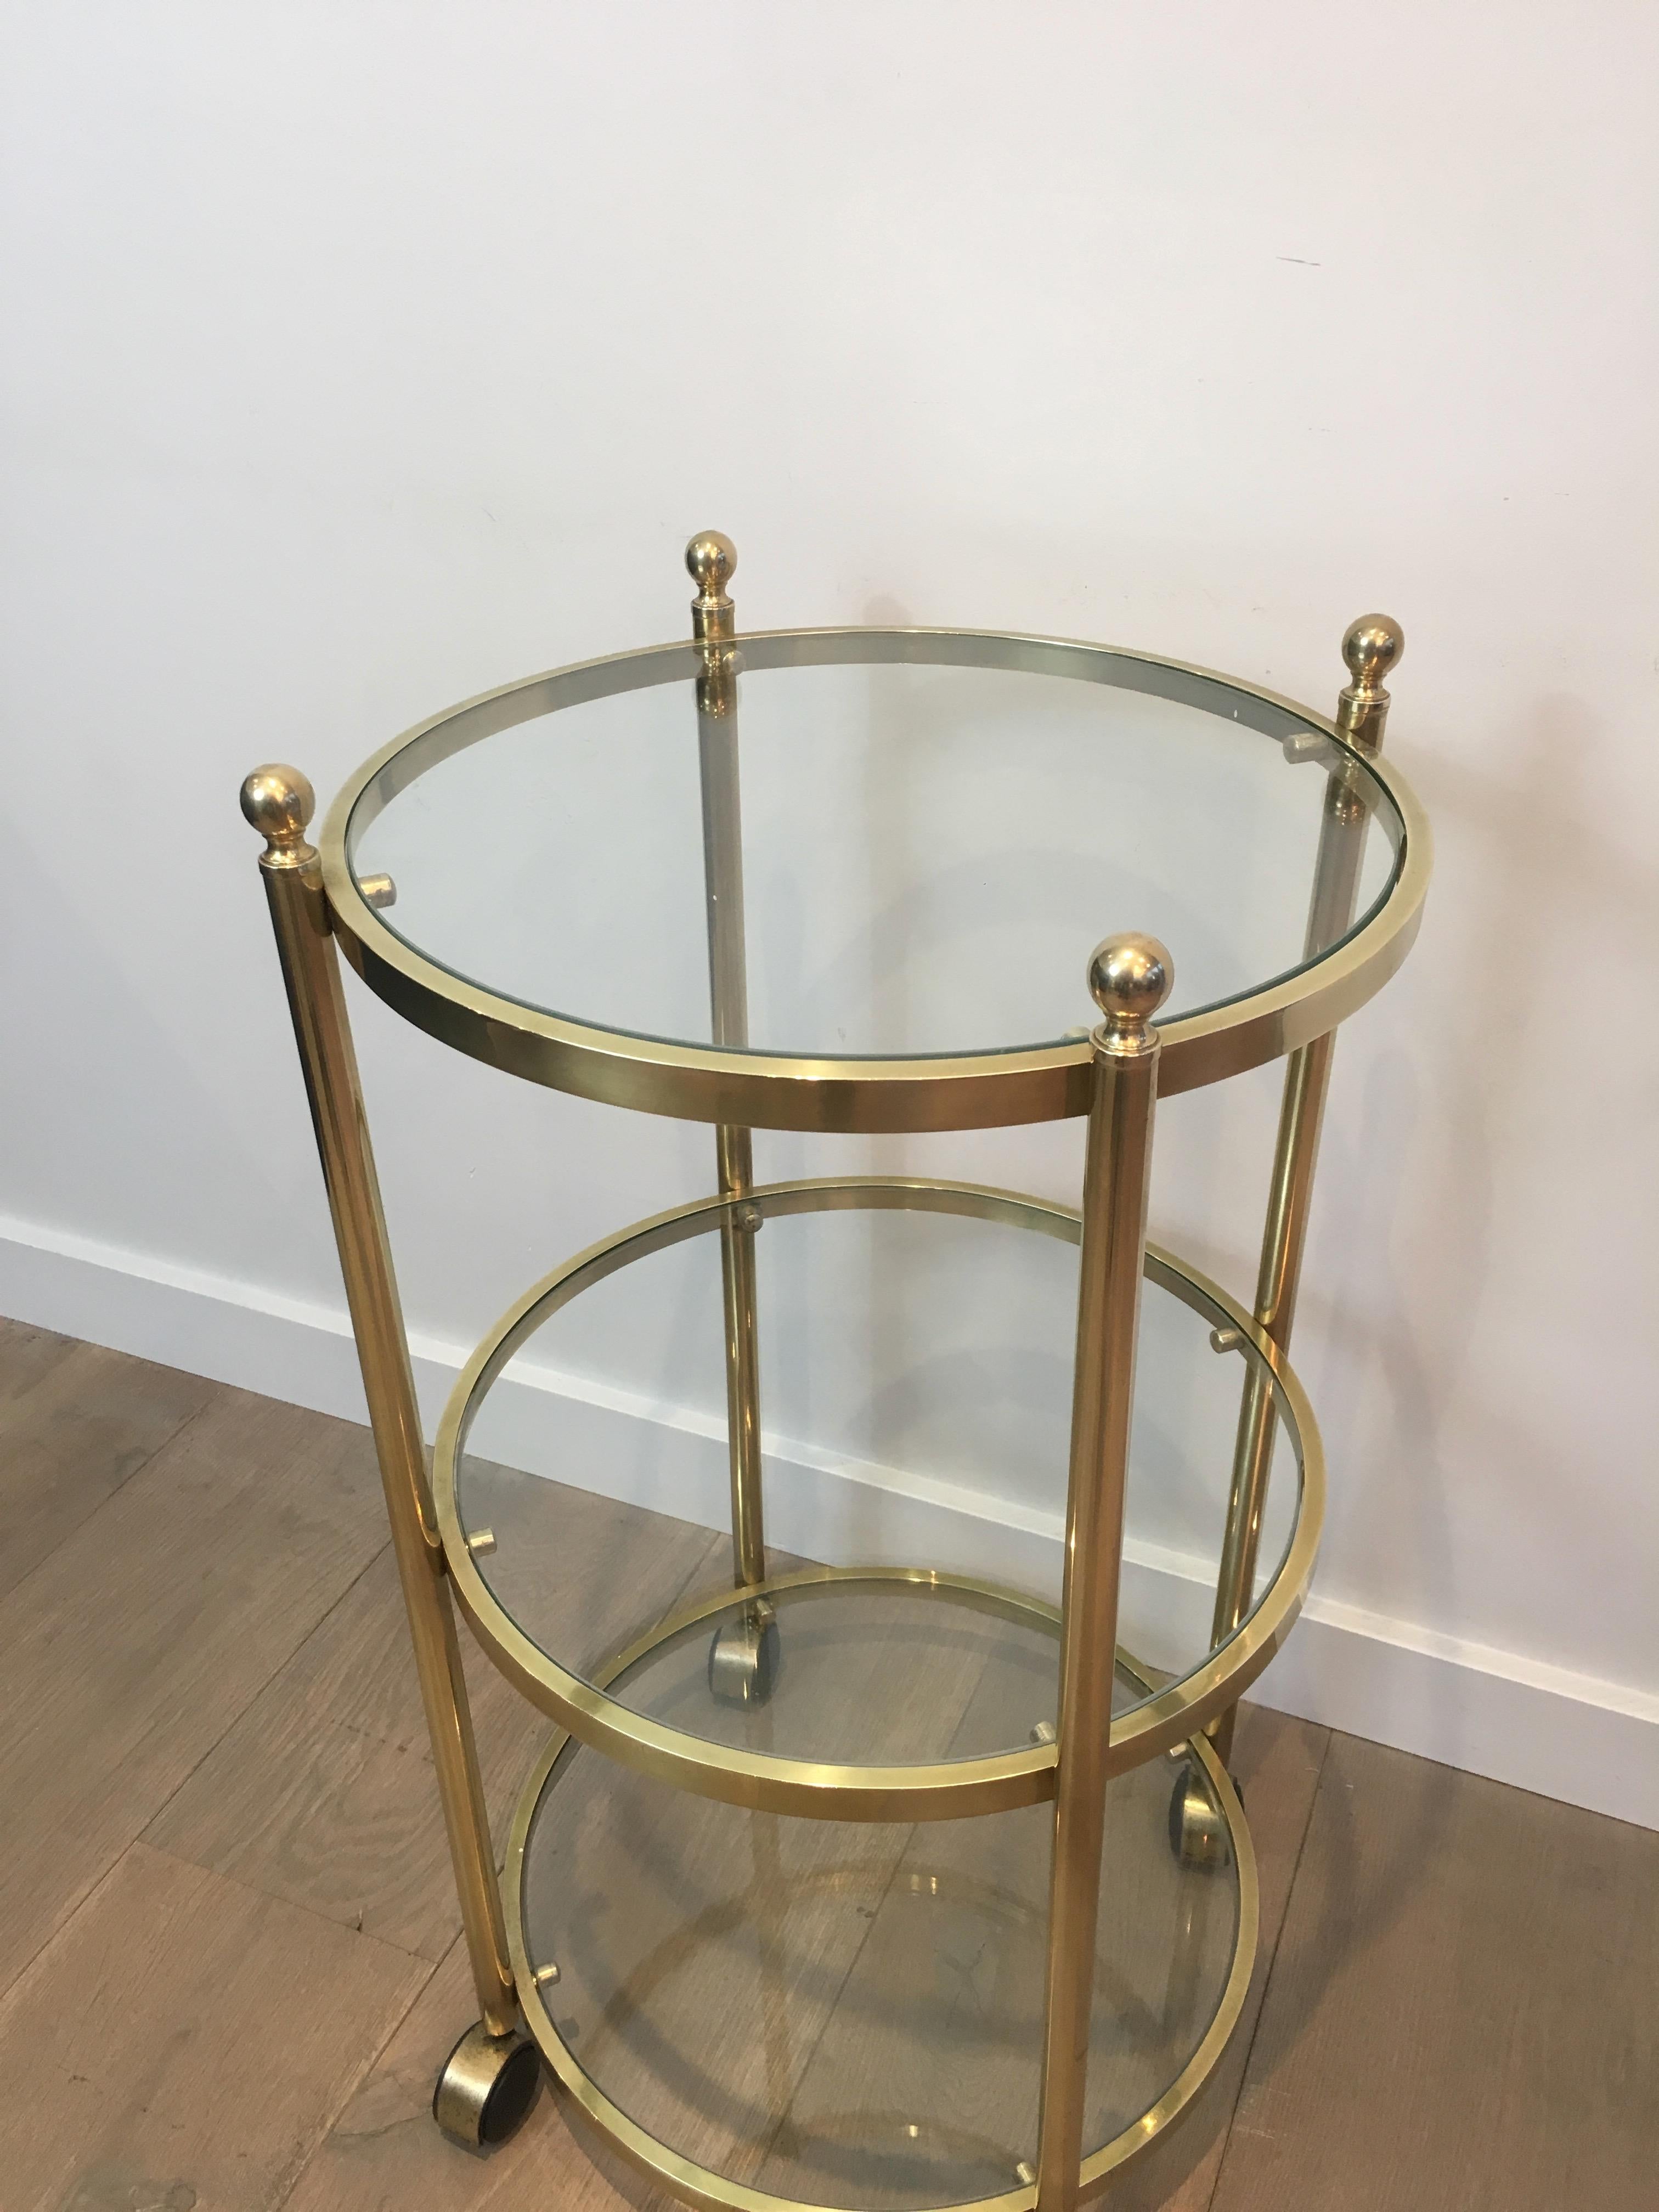 Late 20th Century 3 Tiers Round Brass Side Table on Casters, French, circa 1970